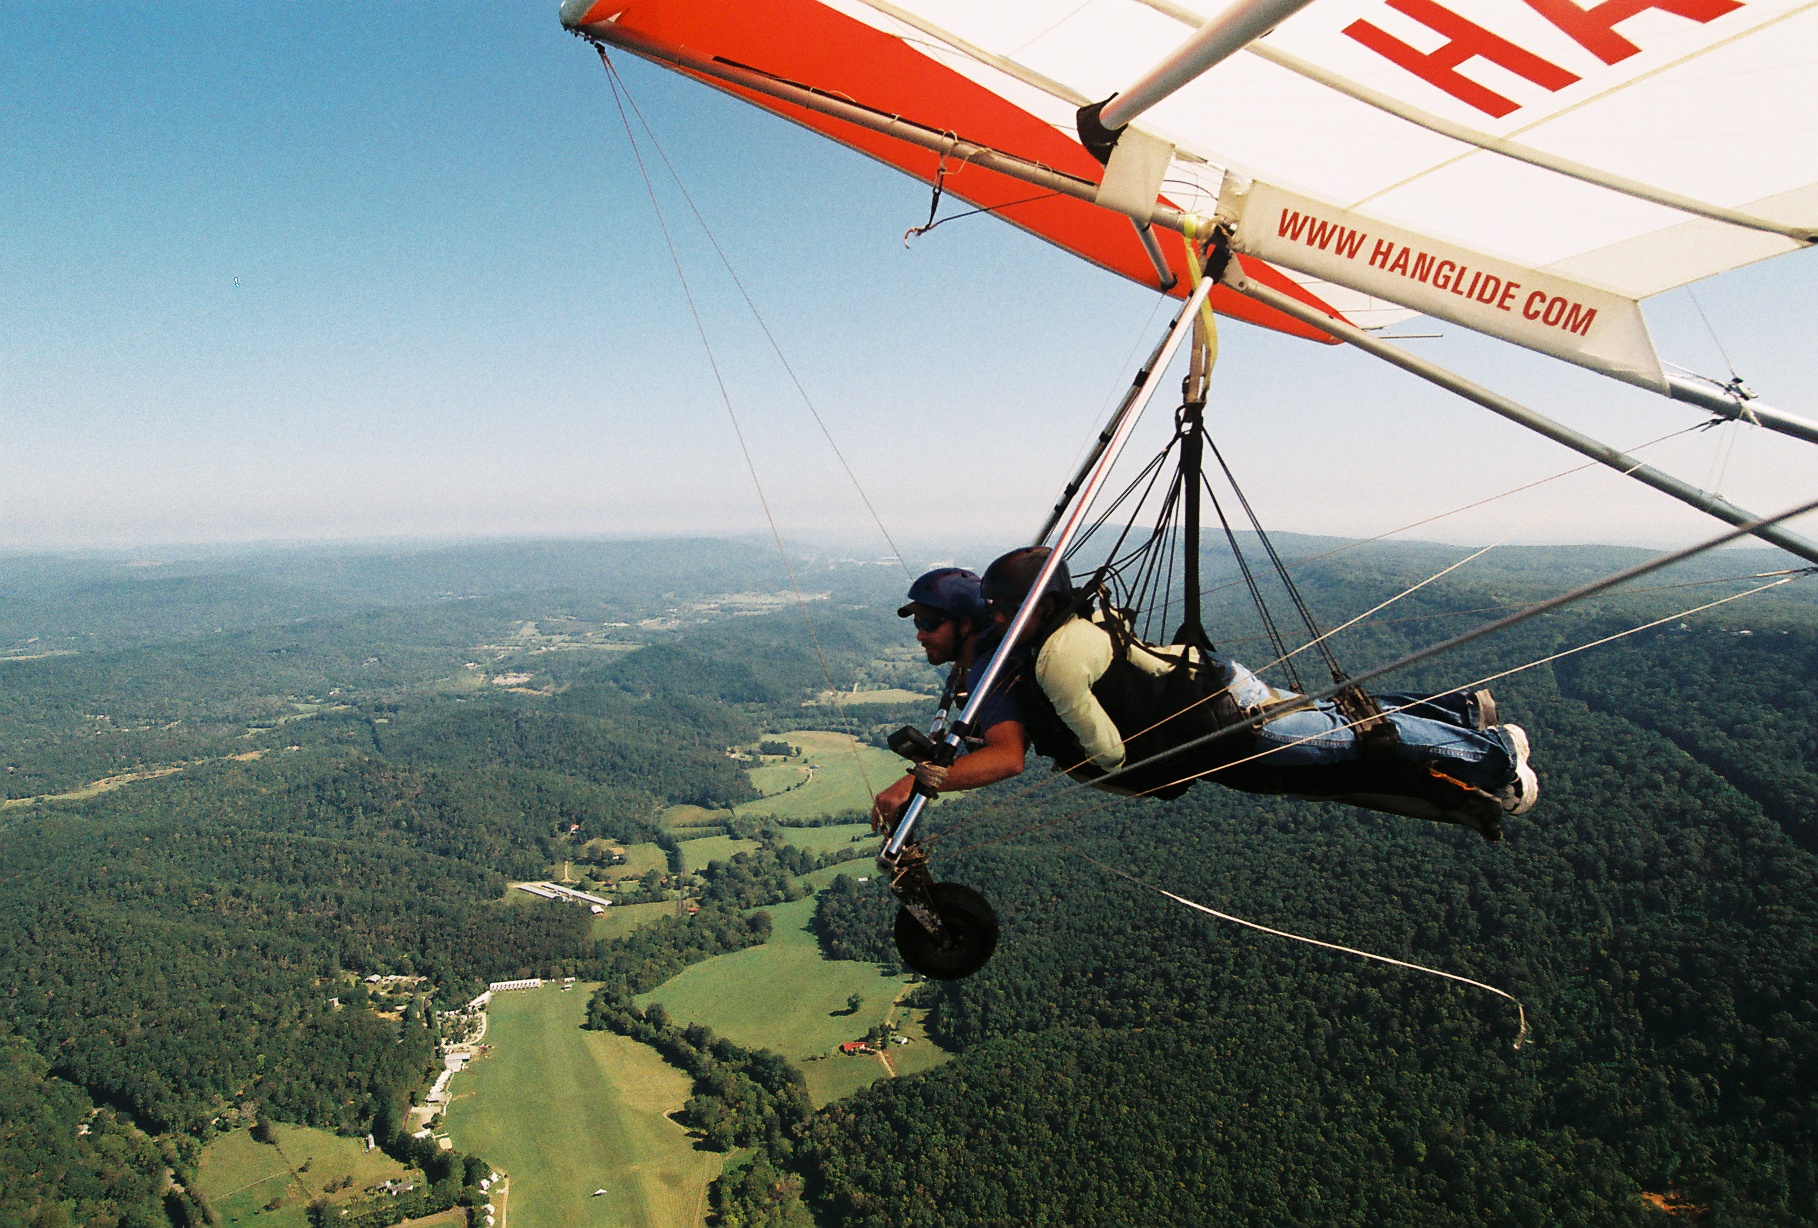 Hang gliding off of Lookout Mountain